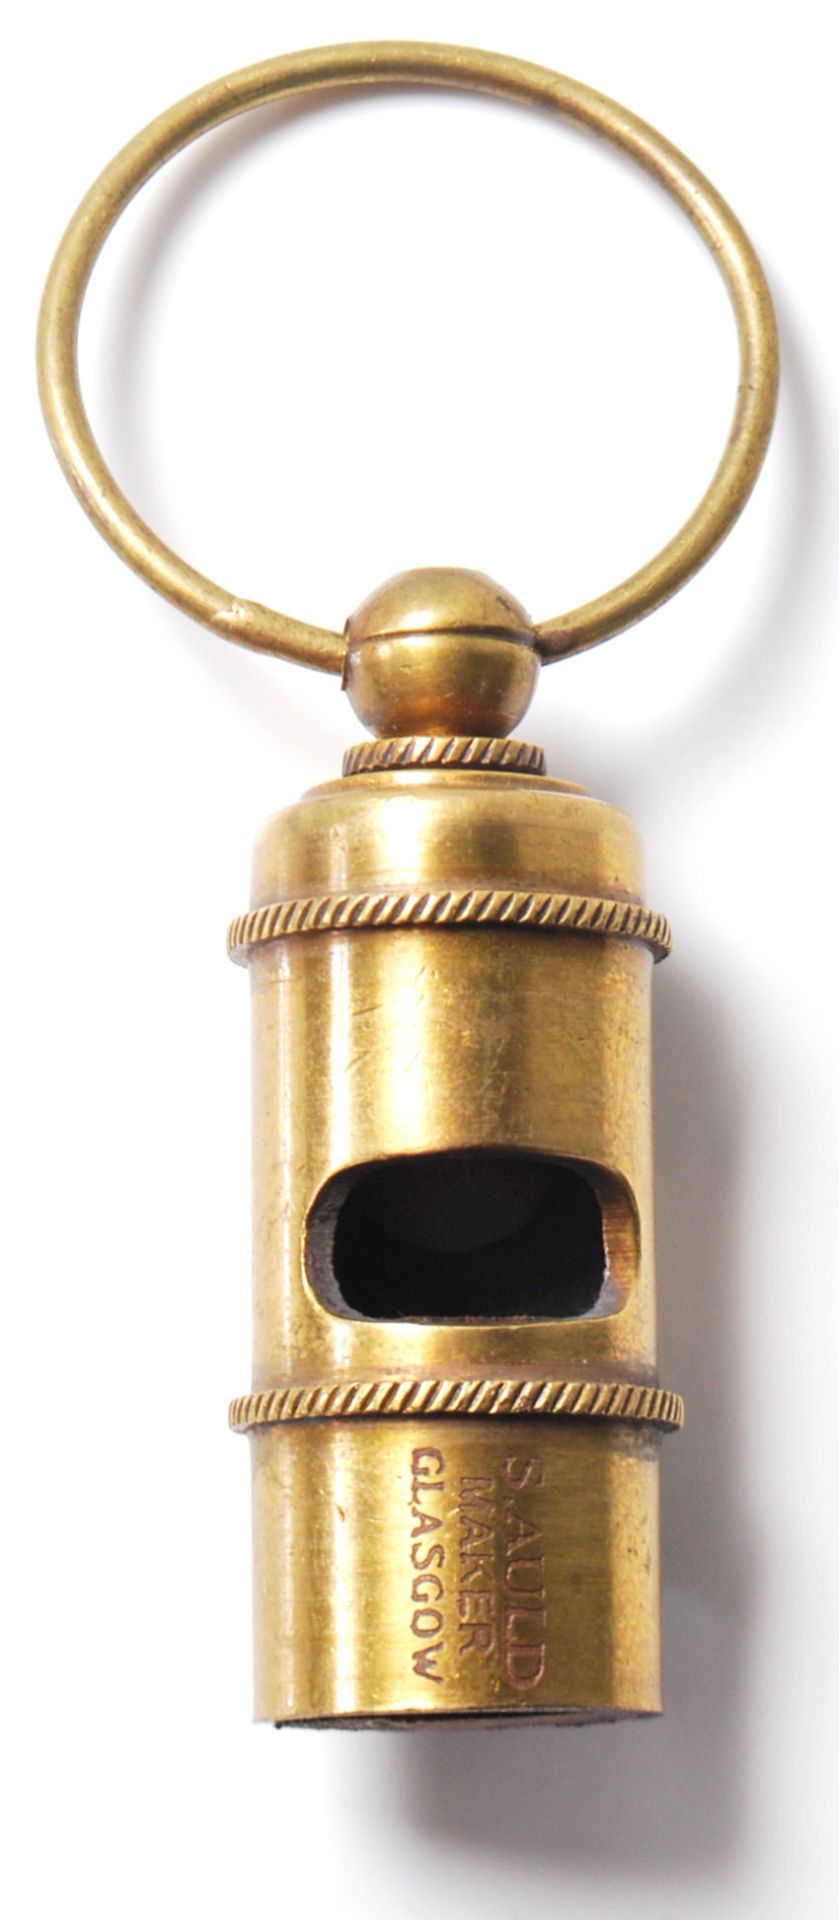 AN INSCRIBED WHITE LINE STAR RMS TITANIC WHISTLE.